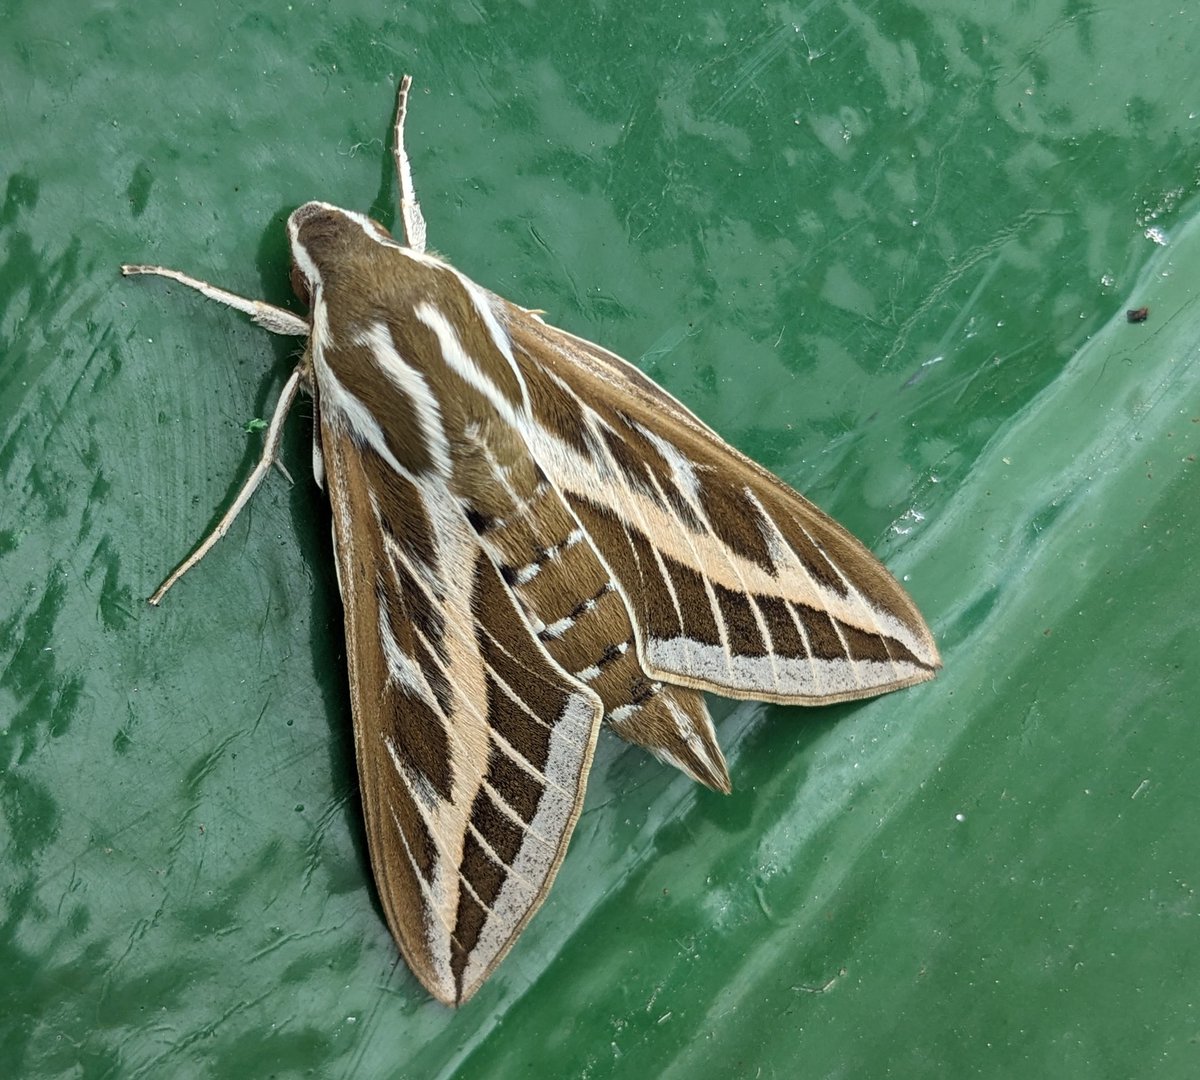 Striped Hawkmoth found on the cruise ship in Valletta harbour today. It is always worth looking out for wildlife, even in the most unexpected places.